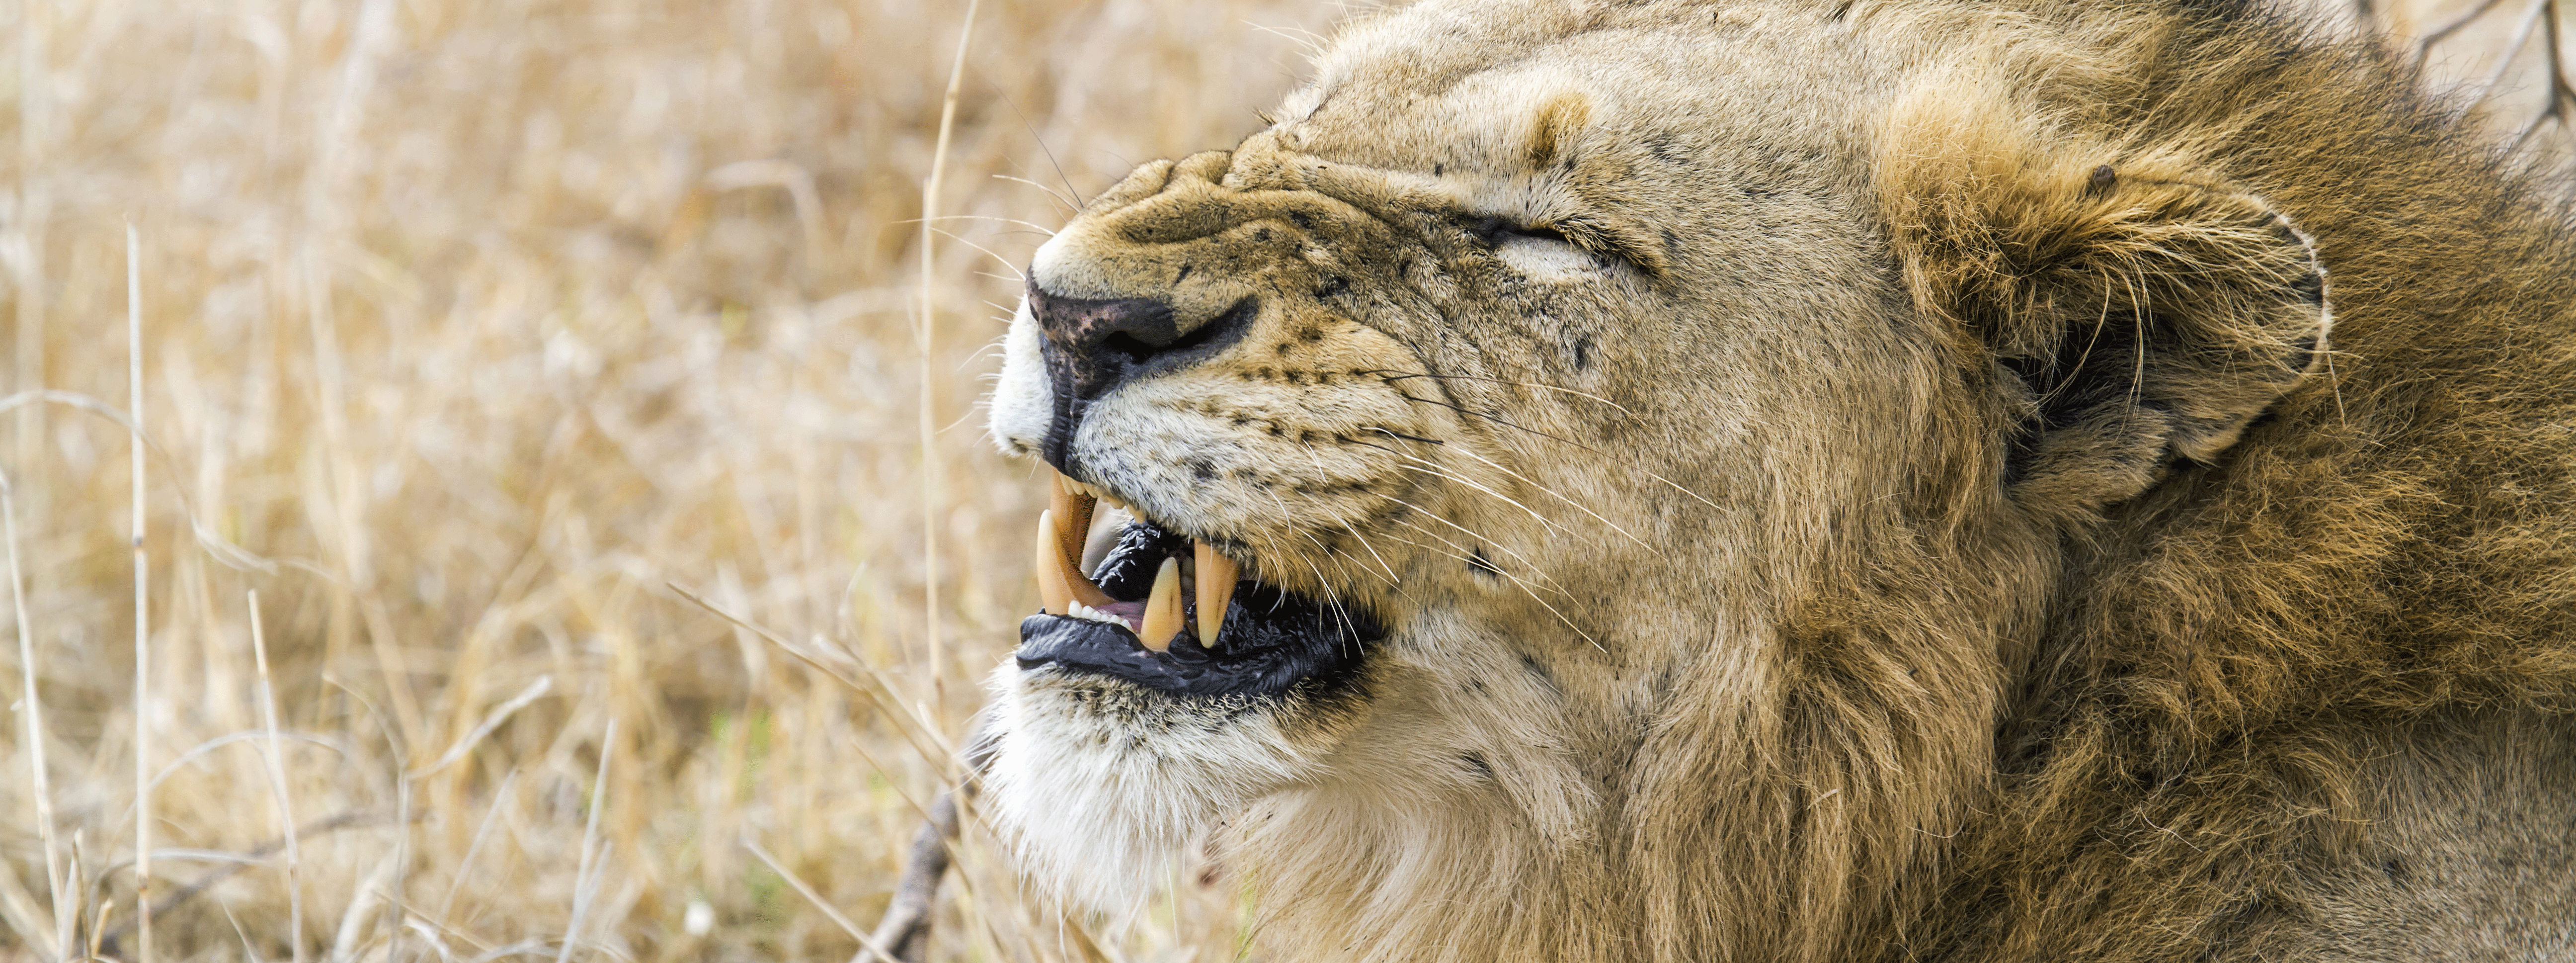 /resource/Images/southafrica/headerimage/Lion-in-Kruger-national-park-South-Africa.png